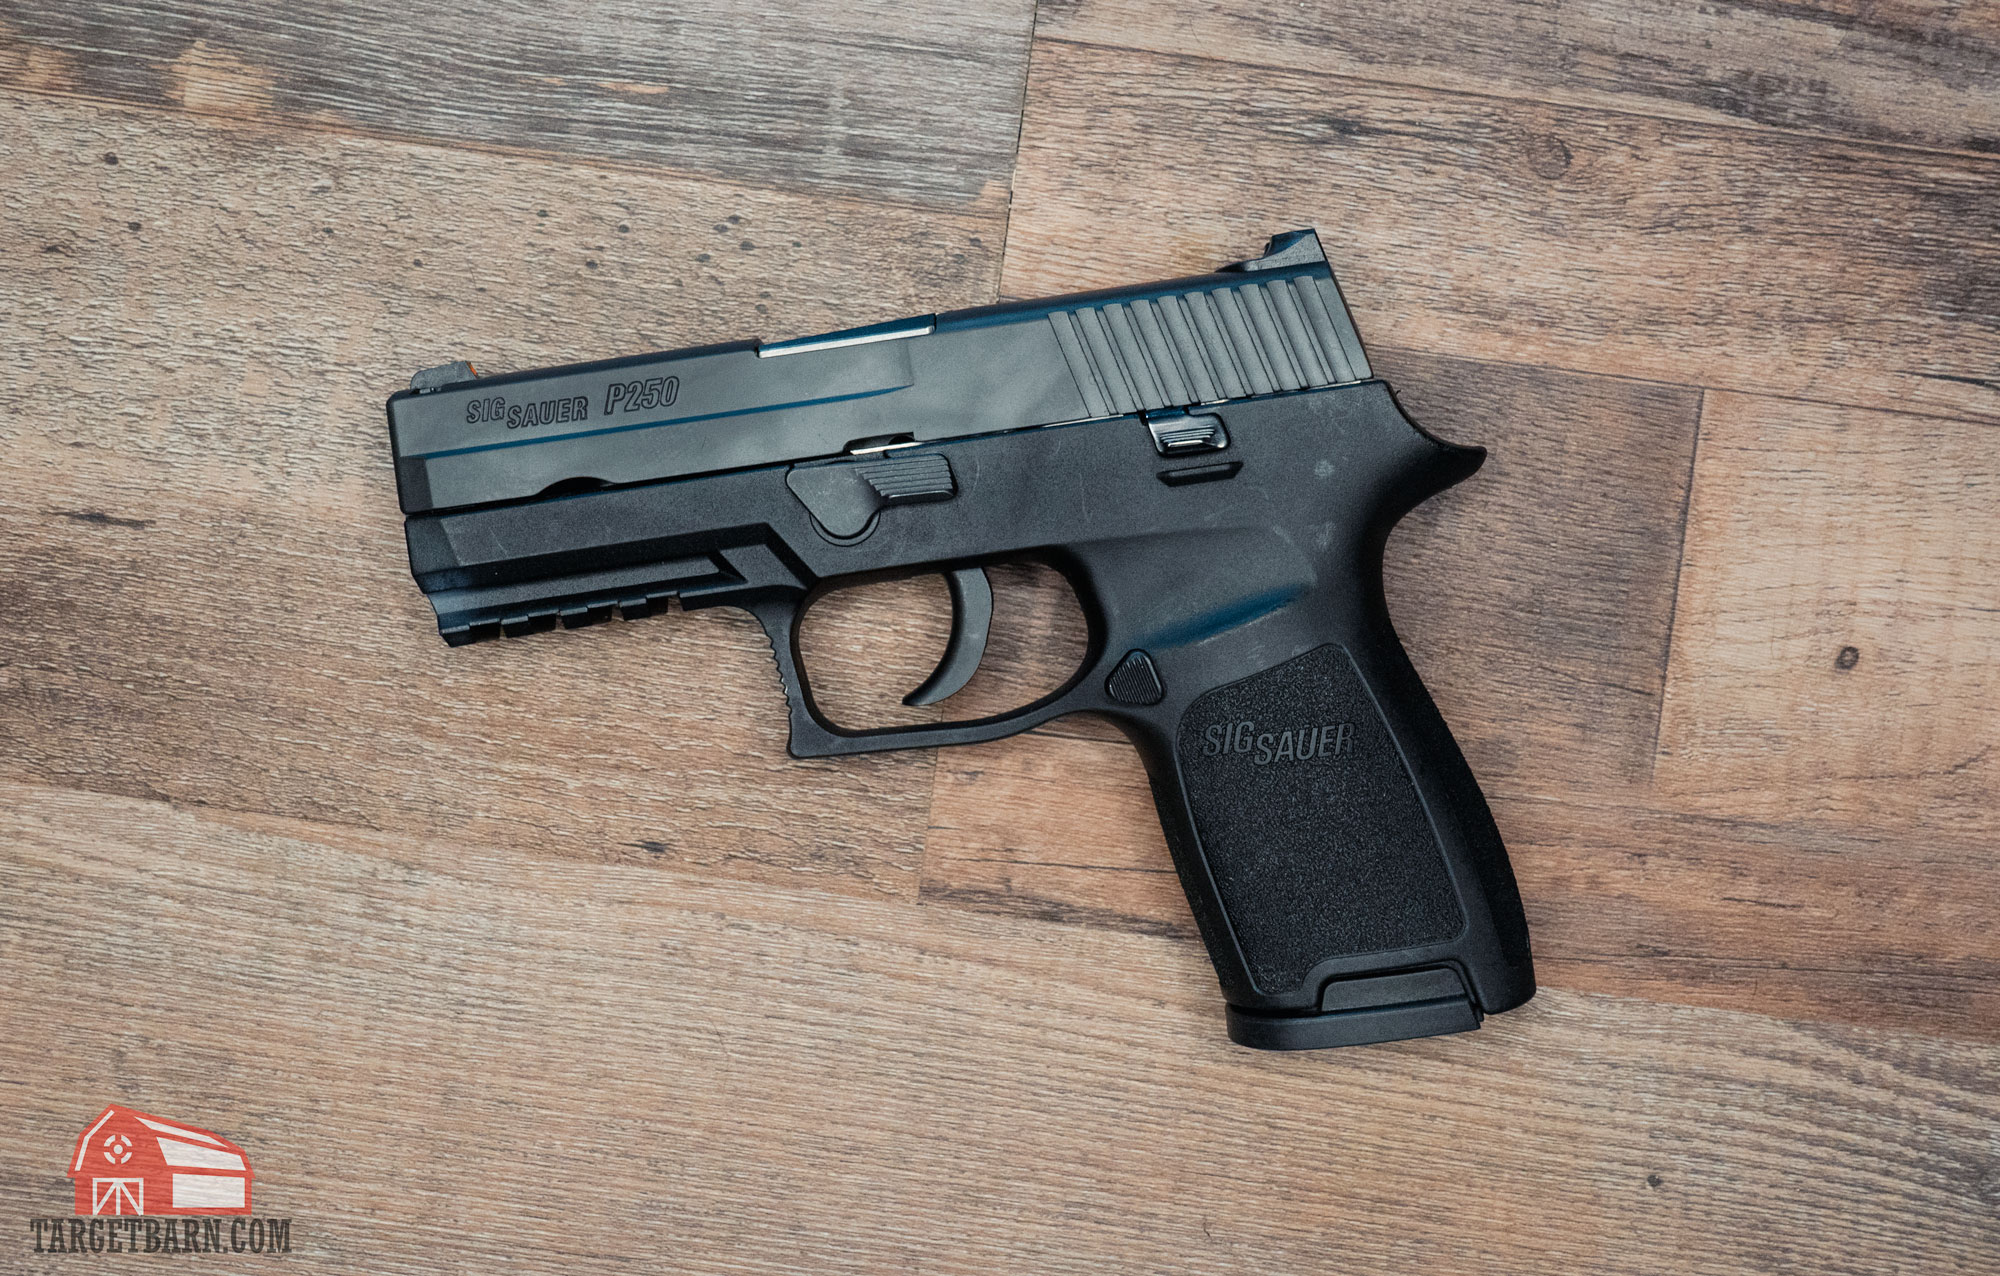 a sig sauer p250 double action only pistol